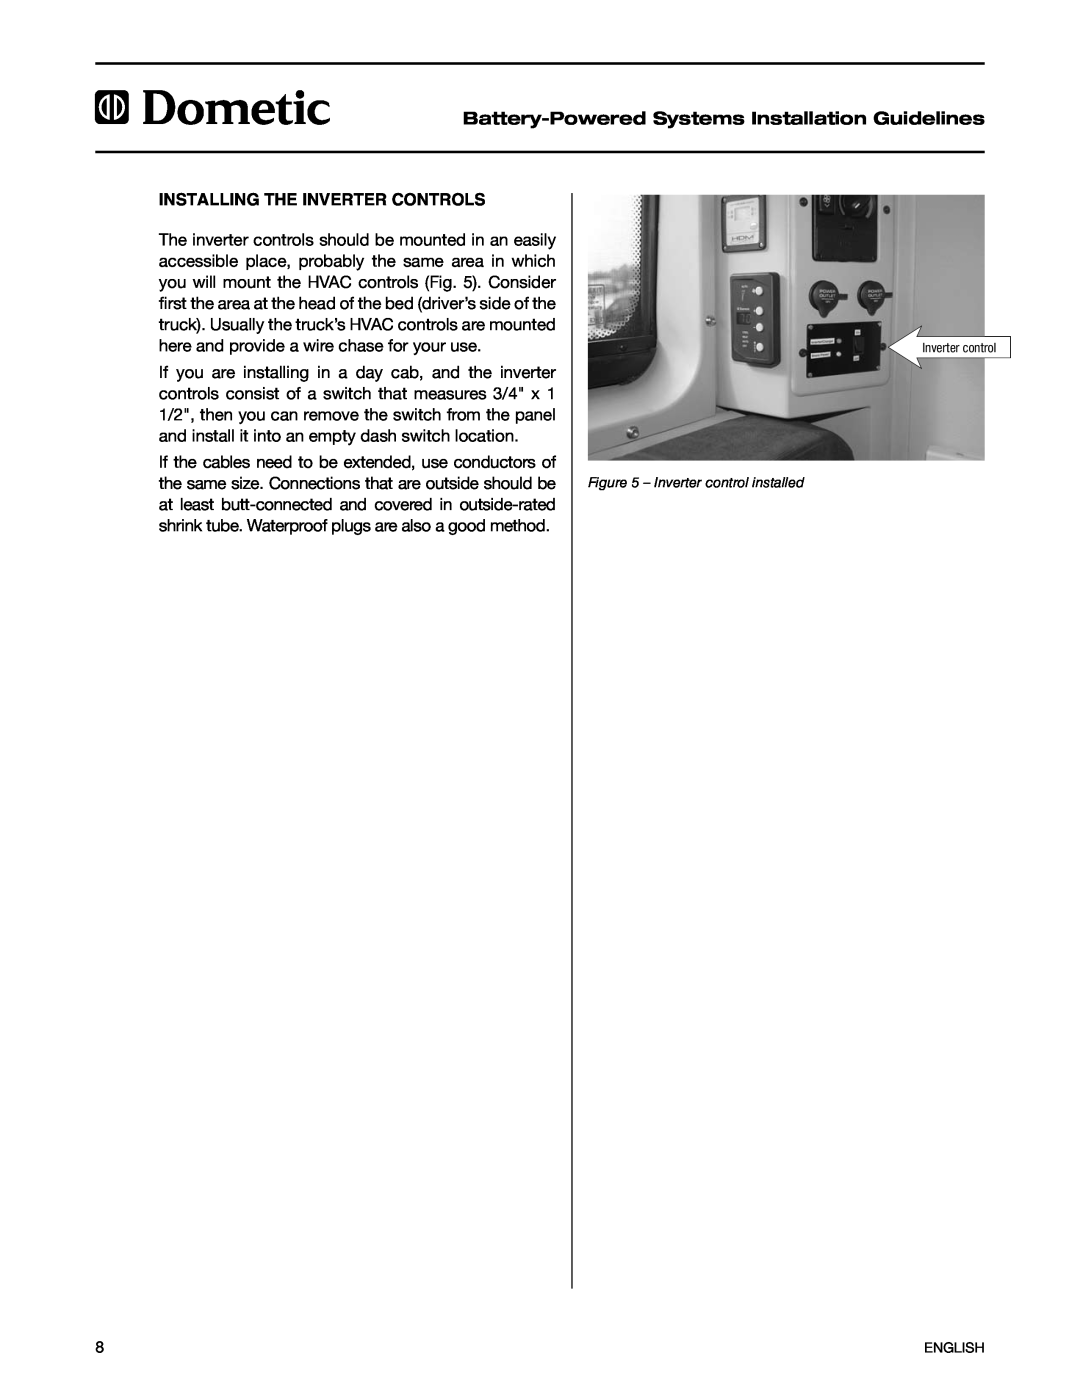 Dometic 2597 manual Installing the Inverter Controls, Battery-PoweredSystems Installation Guidelines 